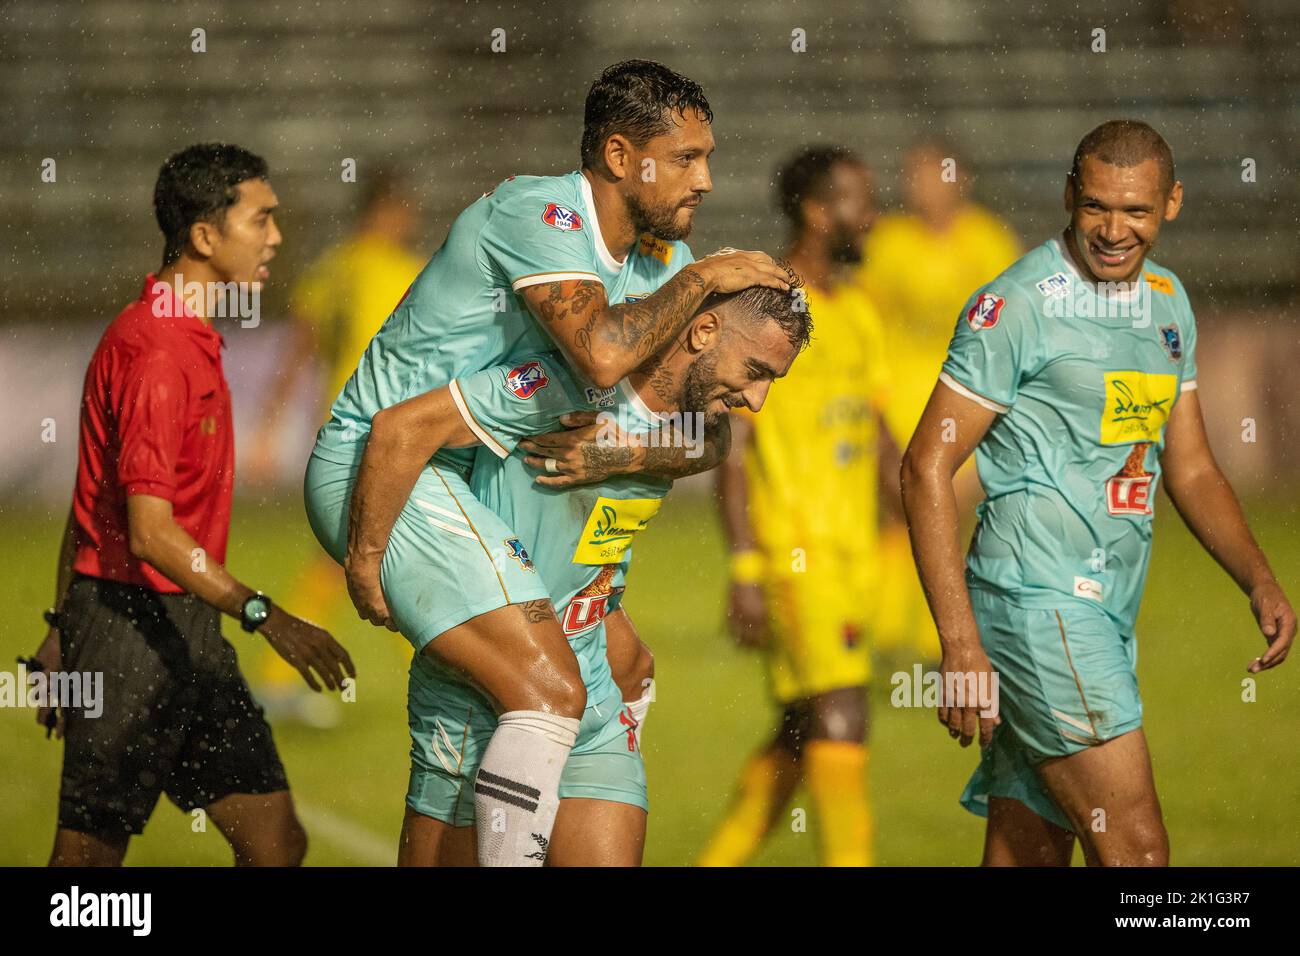 PATTAYA, THAILAND - SEPTEMBER 18:  ERIVELTO EMILIANO DA SILVA of Pattaya Dolphins United celebrates his goal with CAIQUE FREITAS RIBEIRO of Pattaya Dolphins United and DANILO LOPES CEZARIO of Pattaya Dolphins United during the Thai League 3 East match between Pattaya Dolphins and Marines Eureka  at Nong Prue Stadium on September 18, 2022 in PATTAYA, THAILAND (Photo by Peter van der Klooster/Alamy Live News) Stock Photo